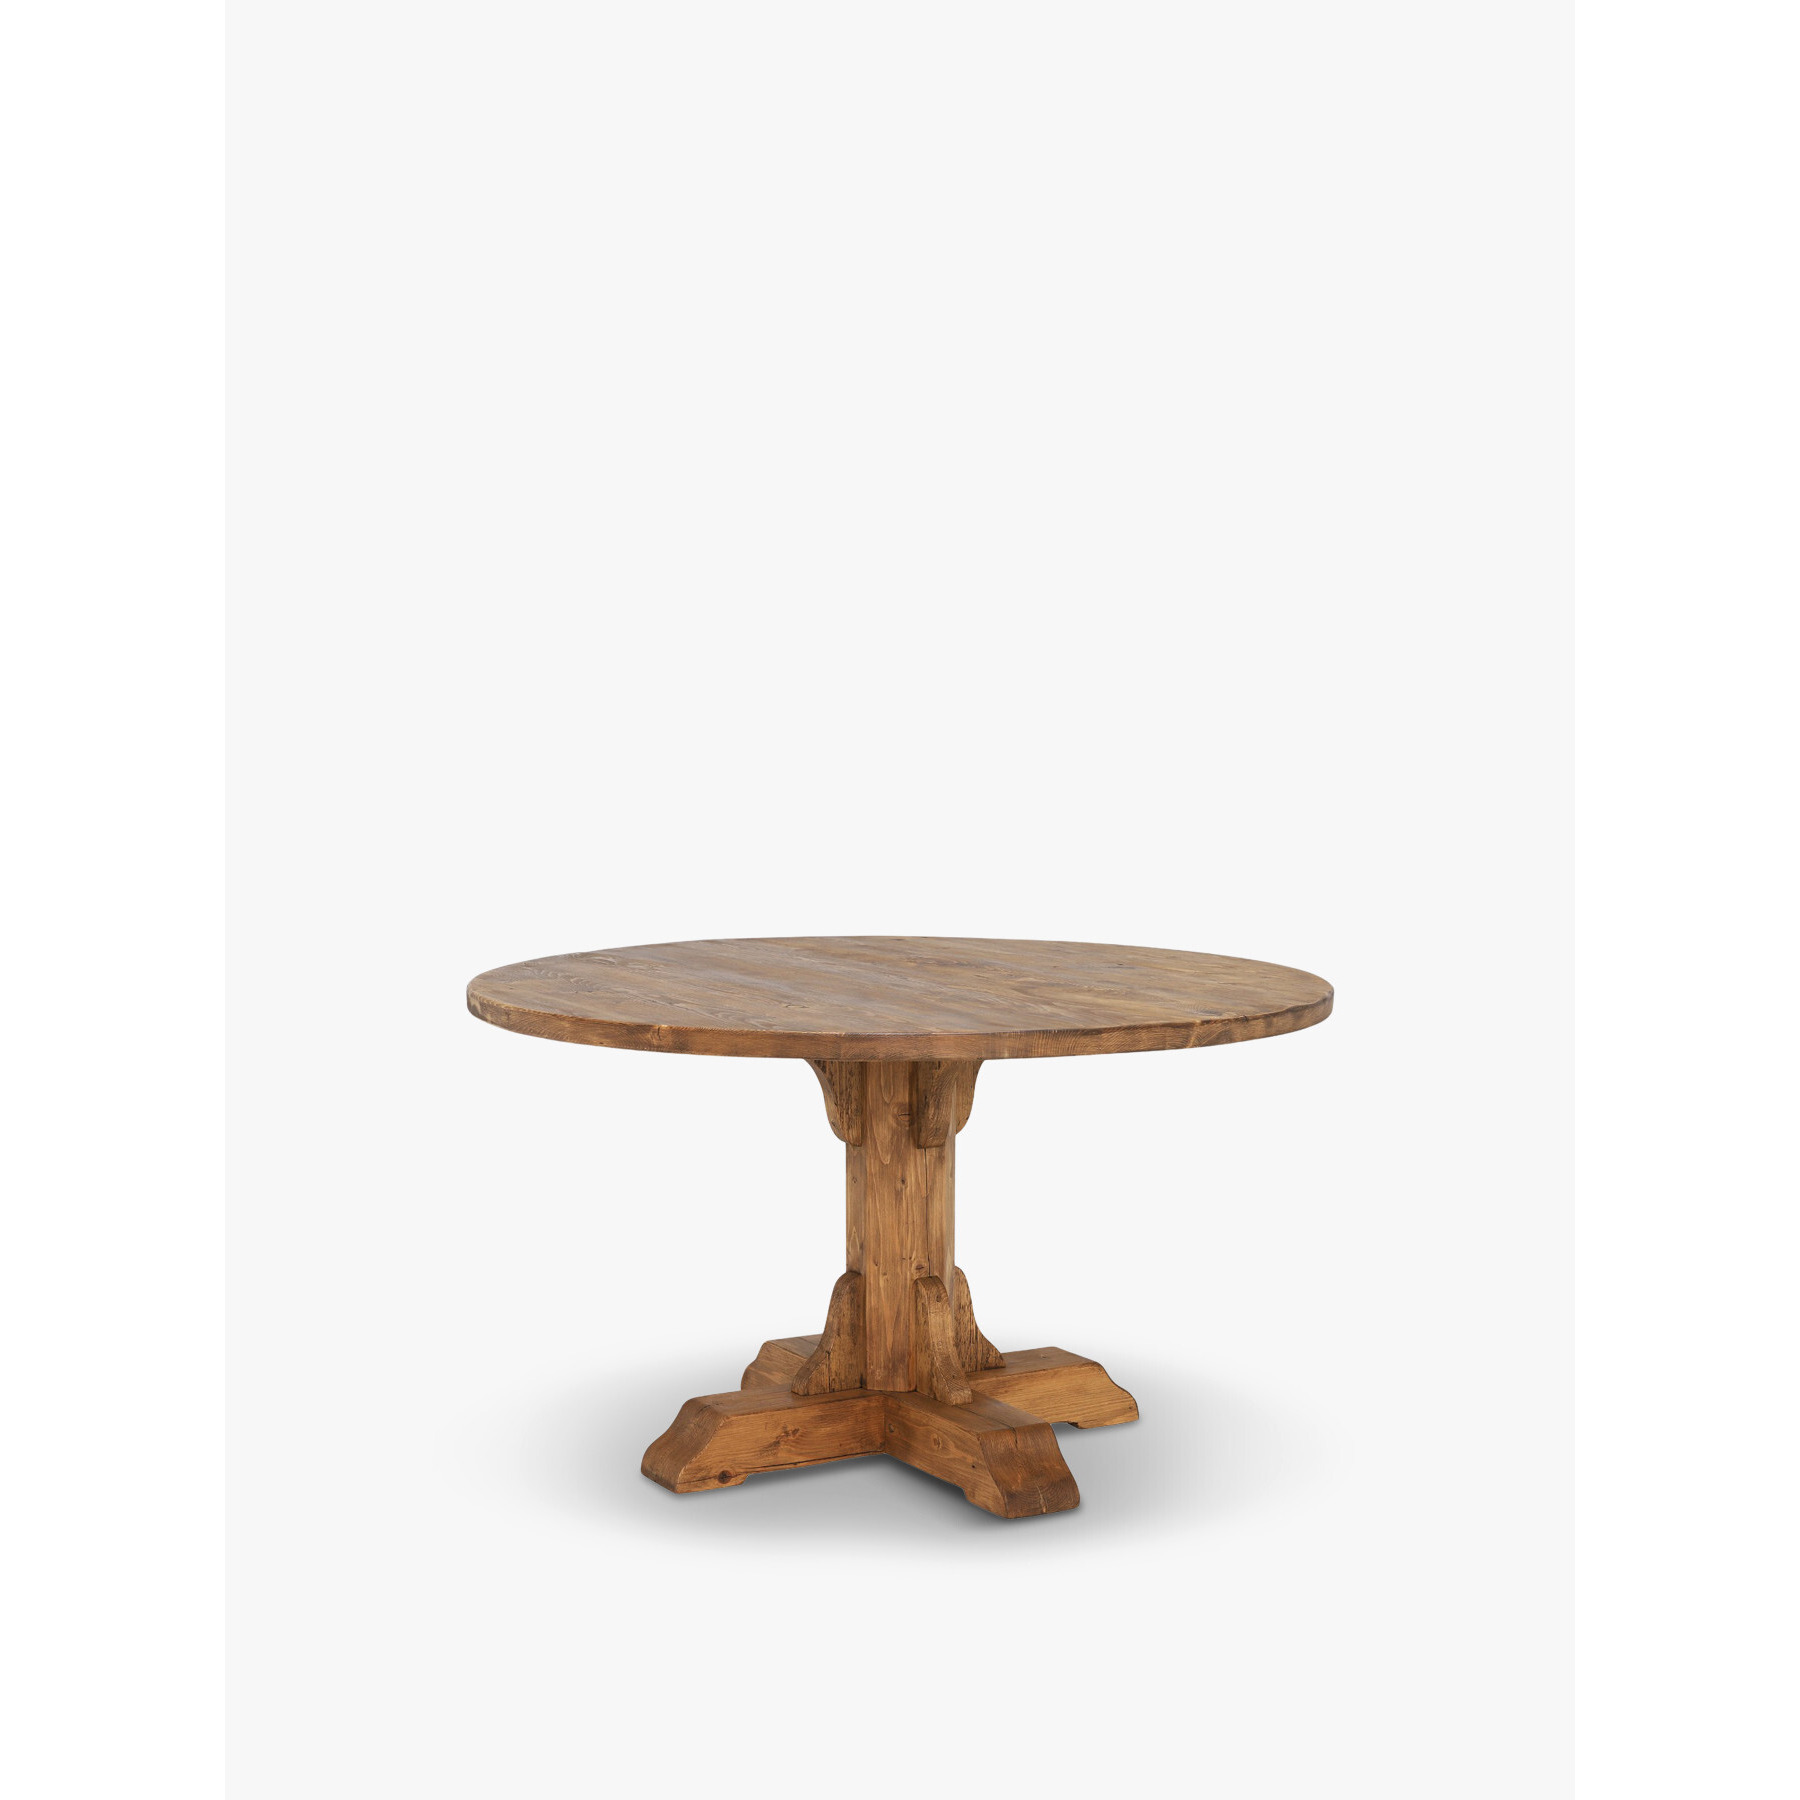 Barker and Stonehouse Covington Reclaimed Wood Round Dining Table Brown - image 1